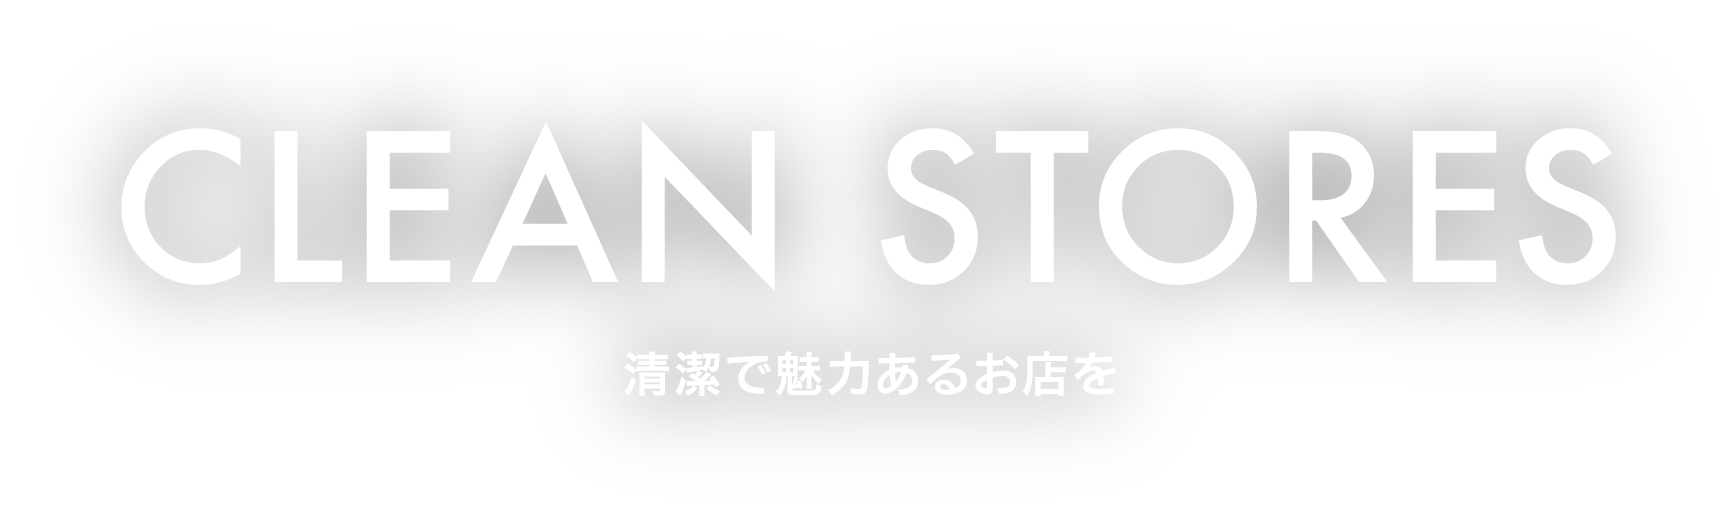 CLEAN STORES 清潔で魅力あるお店を